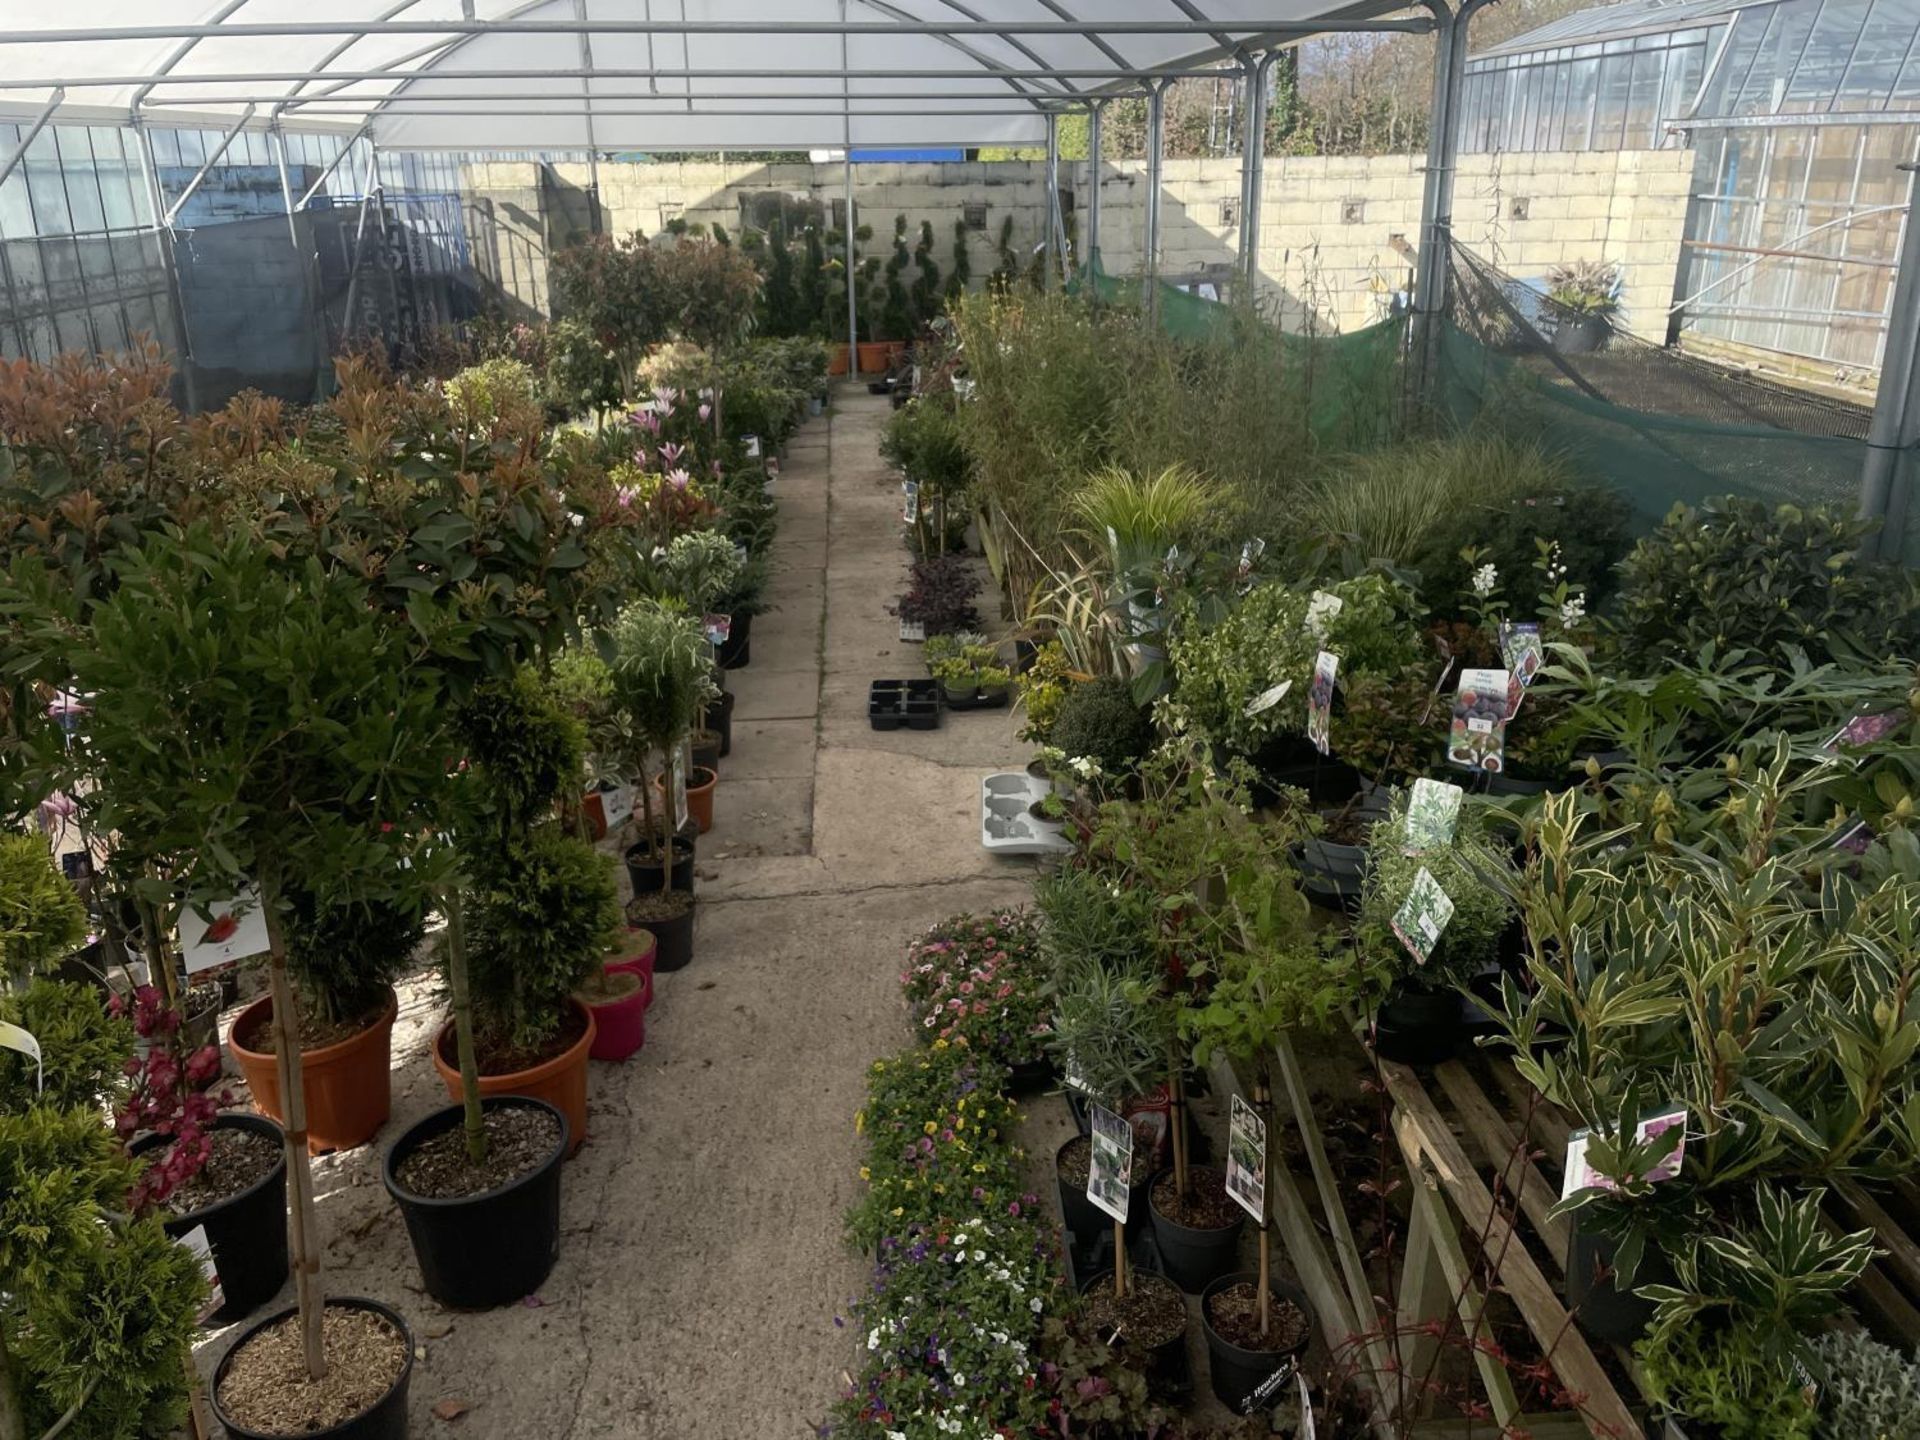 WELCOME TO ASHLEY WALLER HORTICULTURE AUCTION - LOTS ARE BEING ADDED DAILY - Image 6 of 30